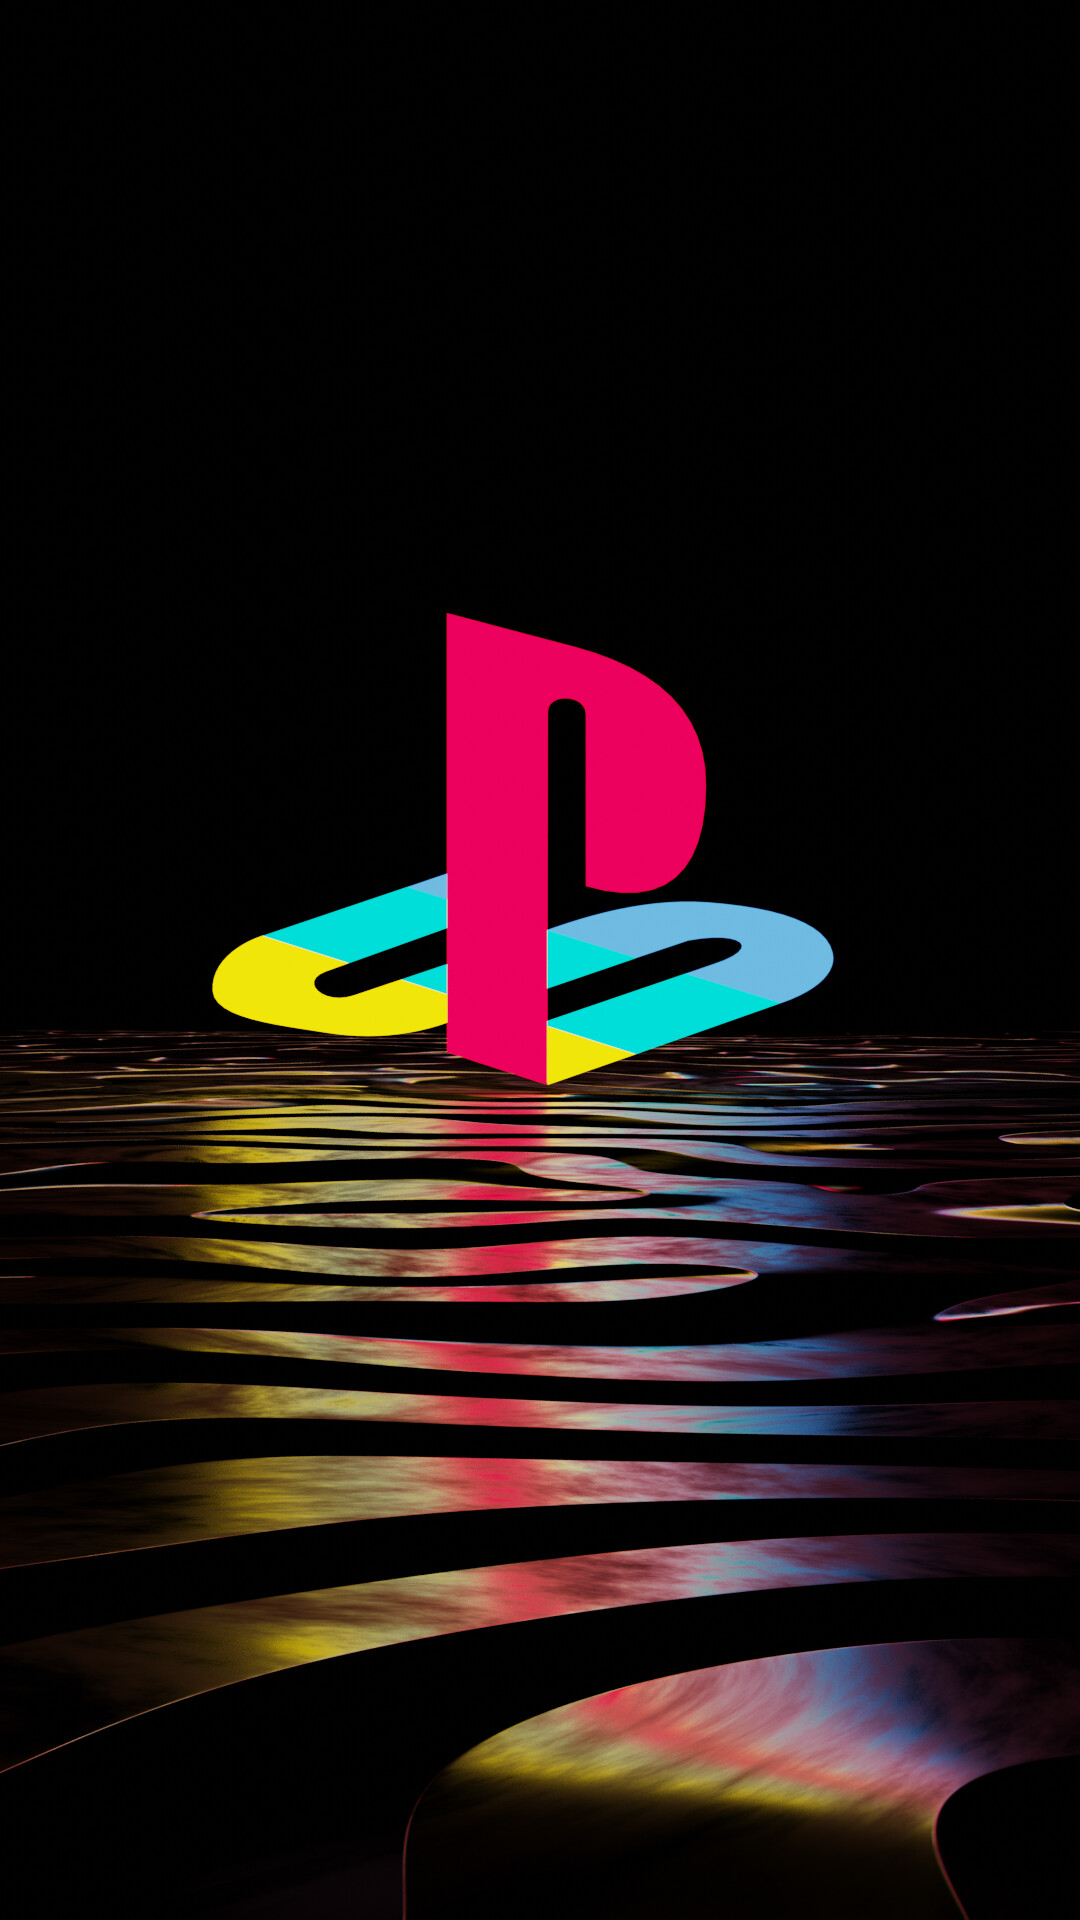 Aesthetic Playstation Logo Wallpapers